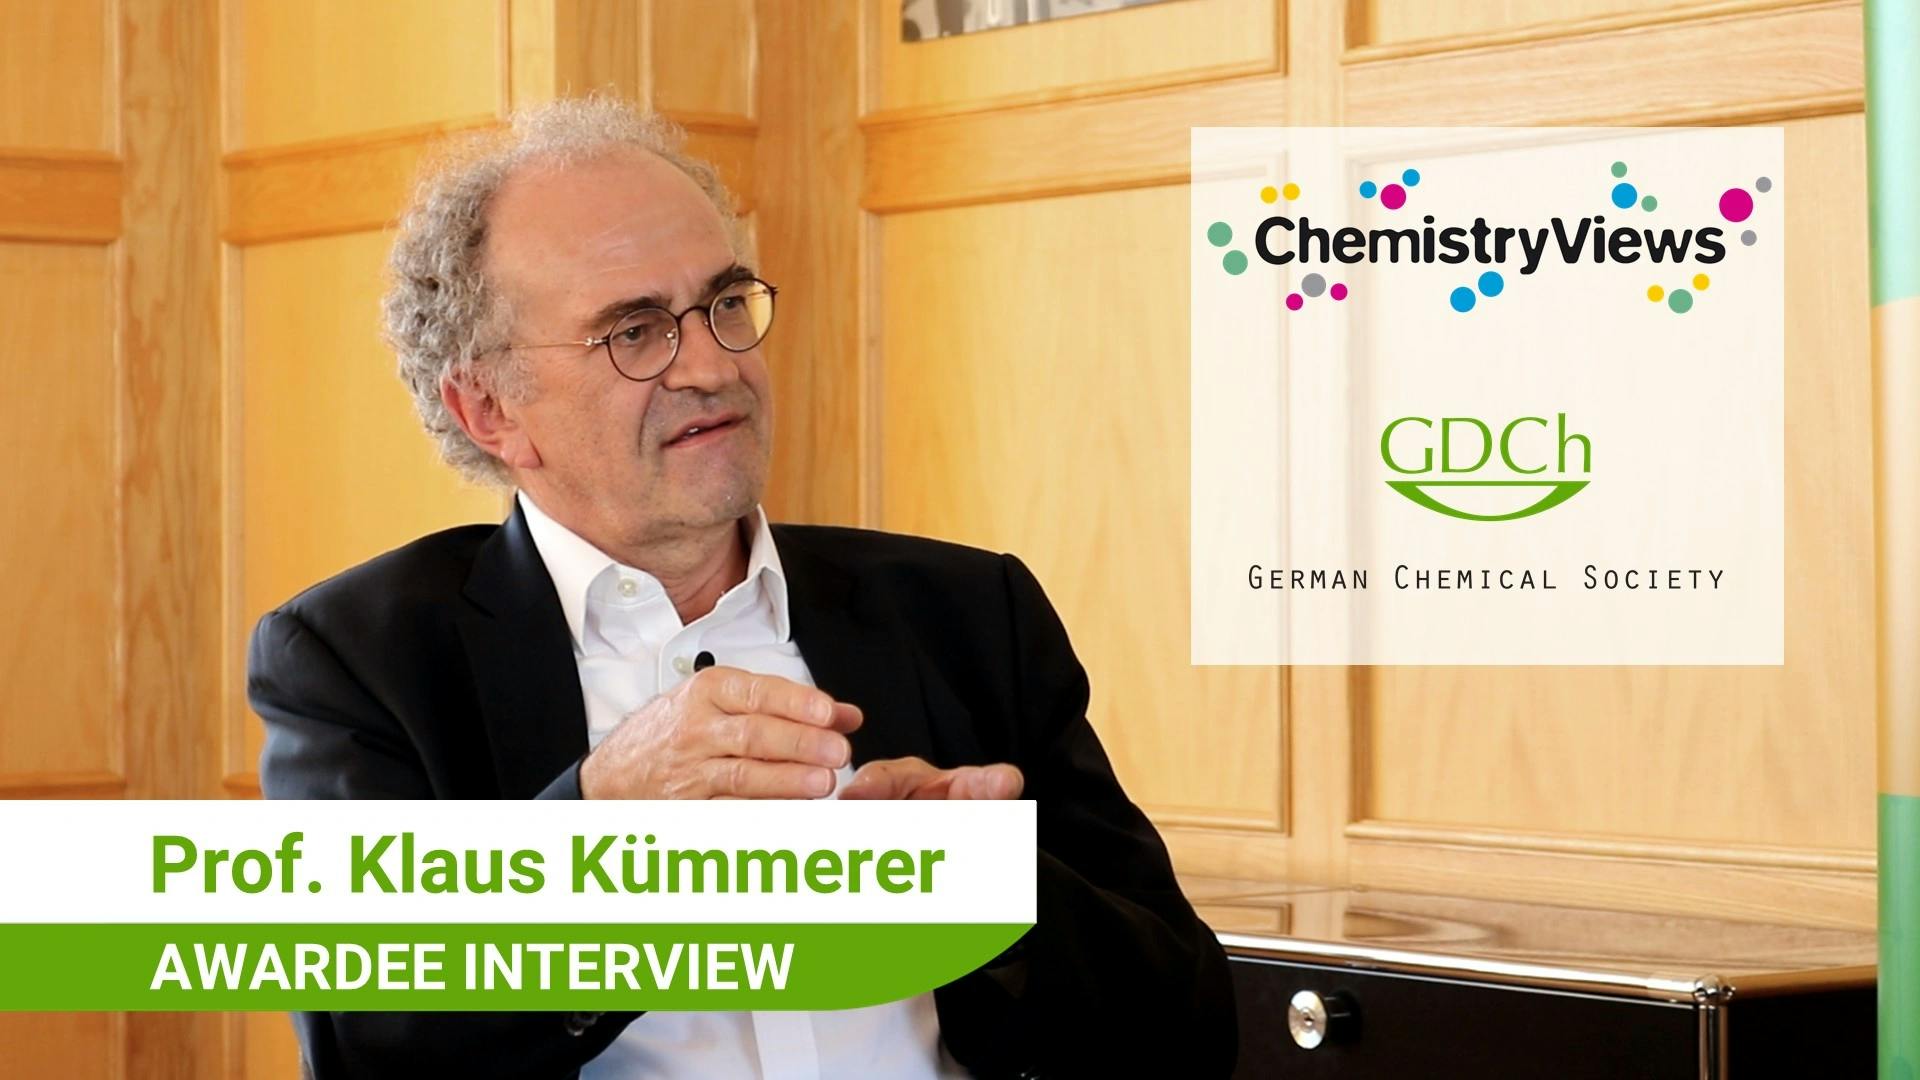 “Don't forget thermodynamics.”—Awardee interview with Klaus Kümmerer